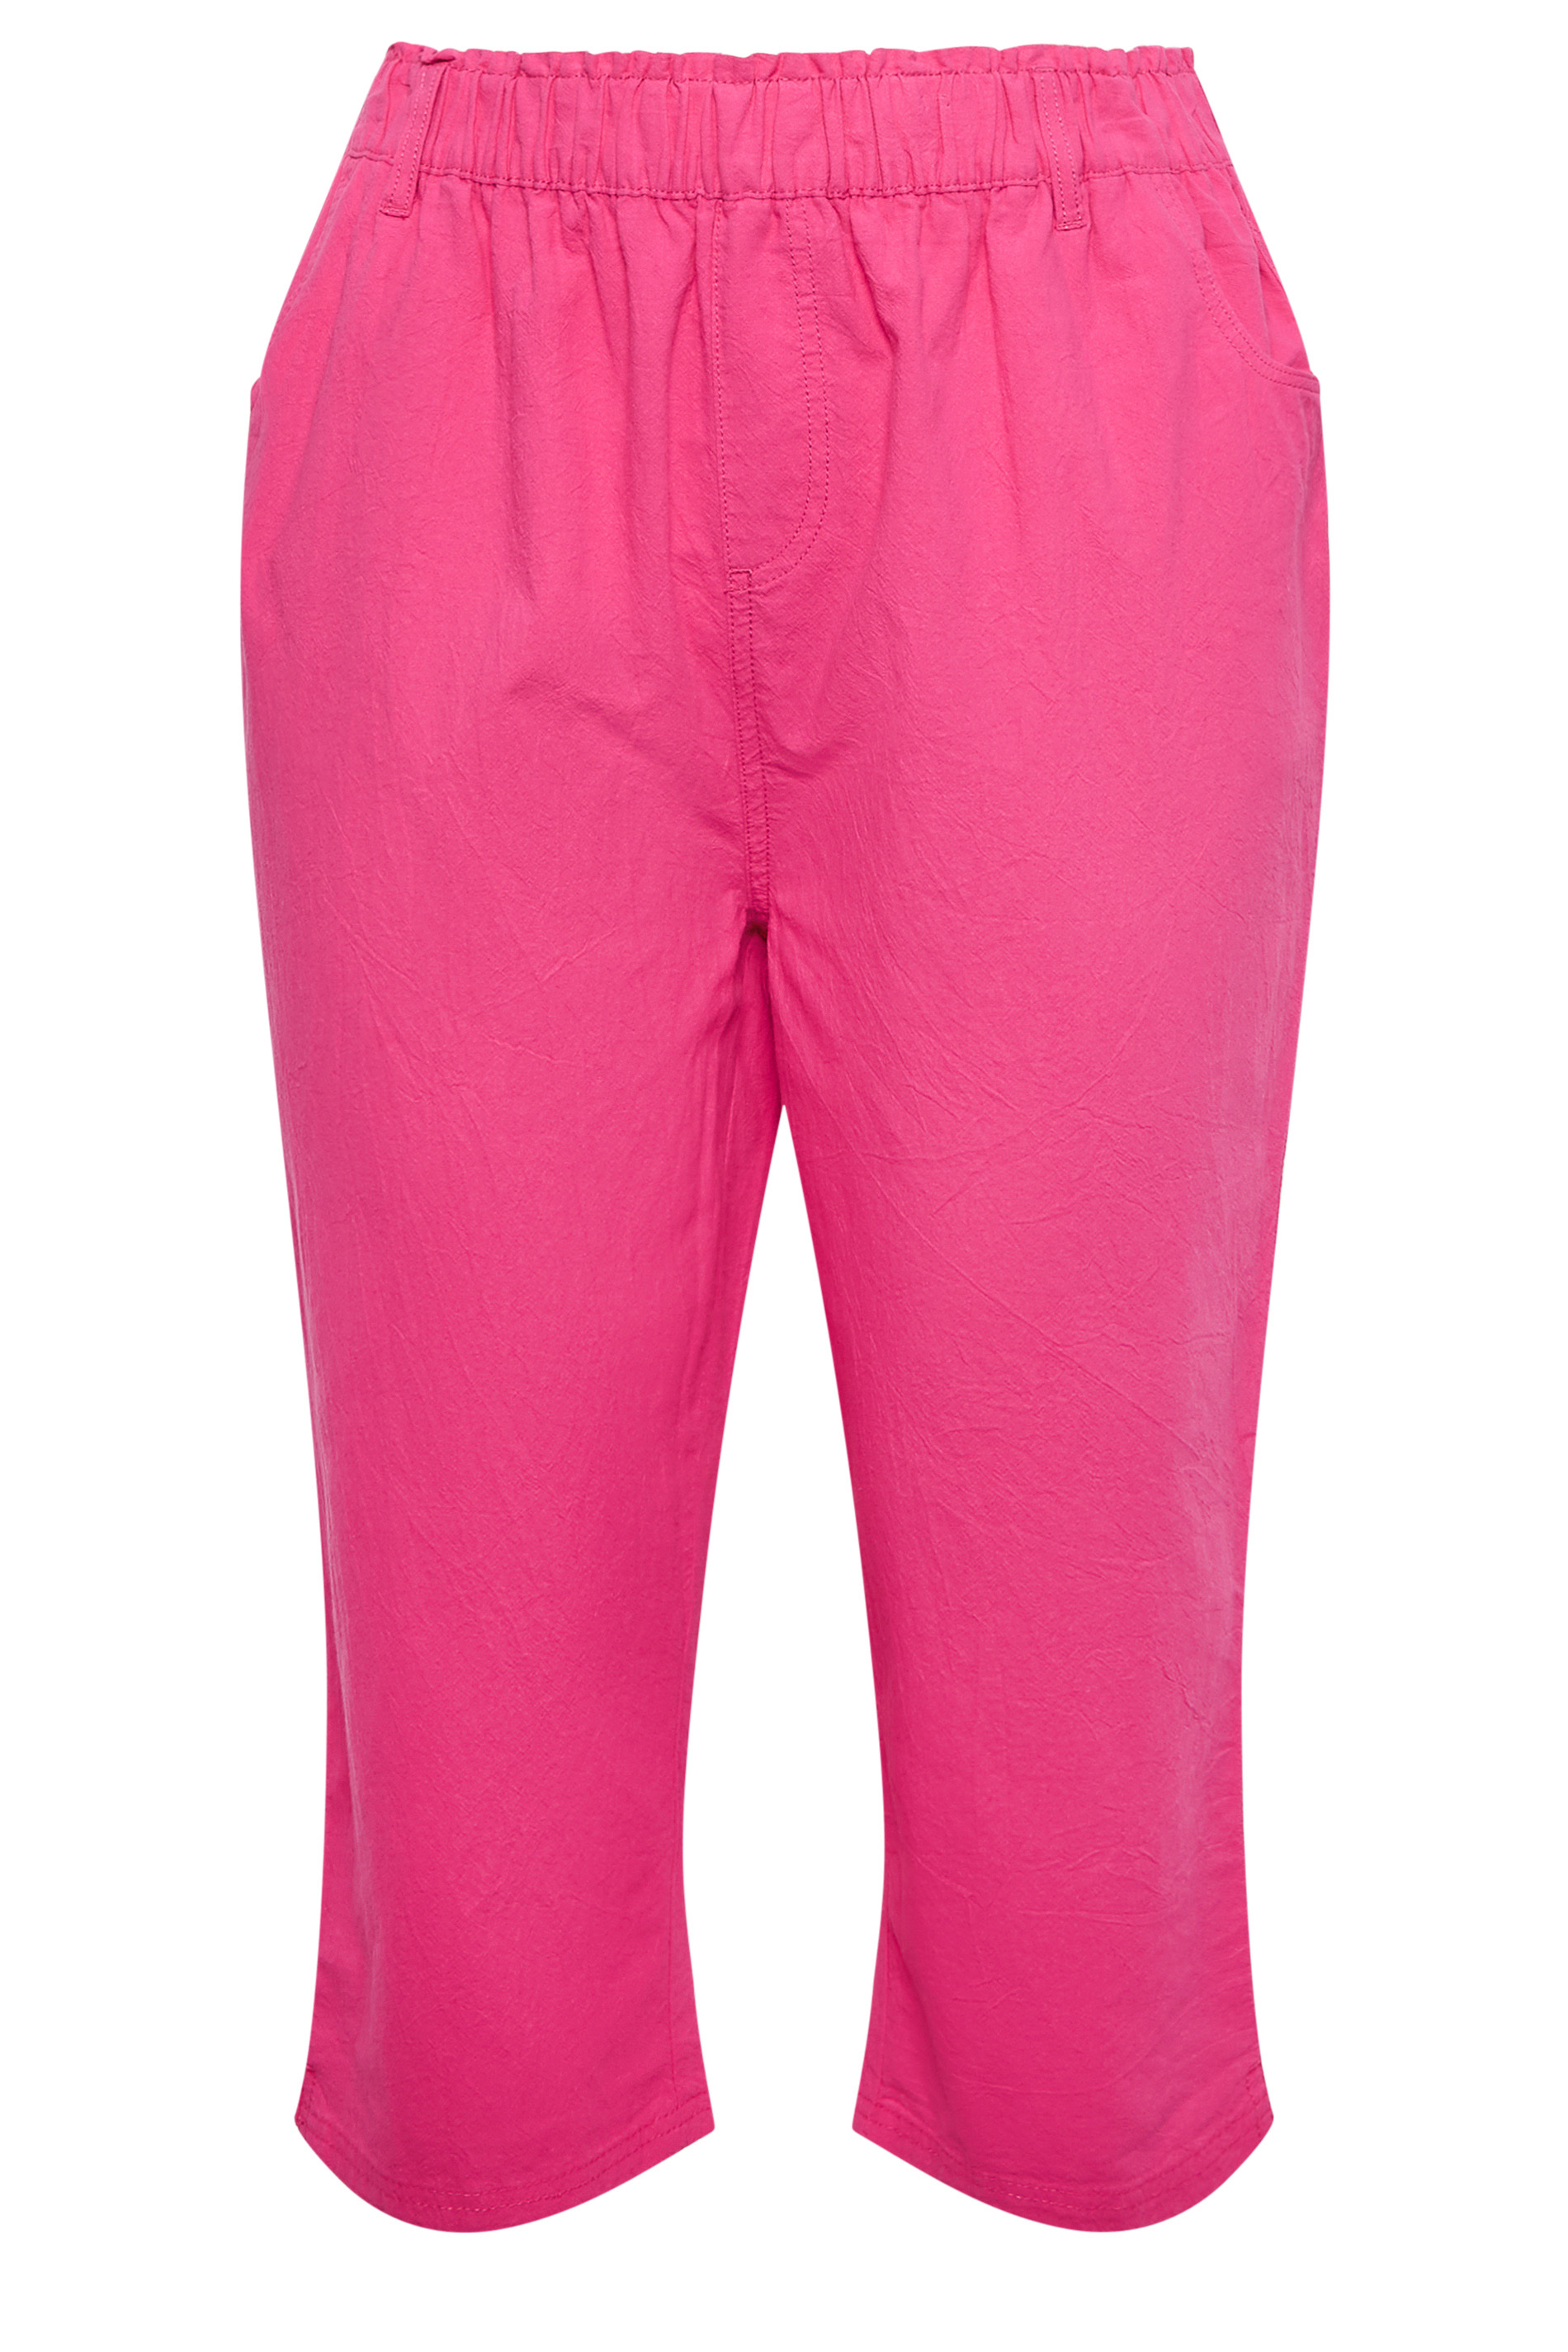 Girl's trousers in organic cotton with decorative drawstring | PlayUp